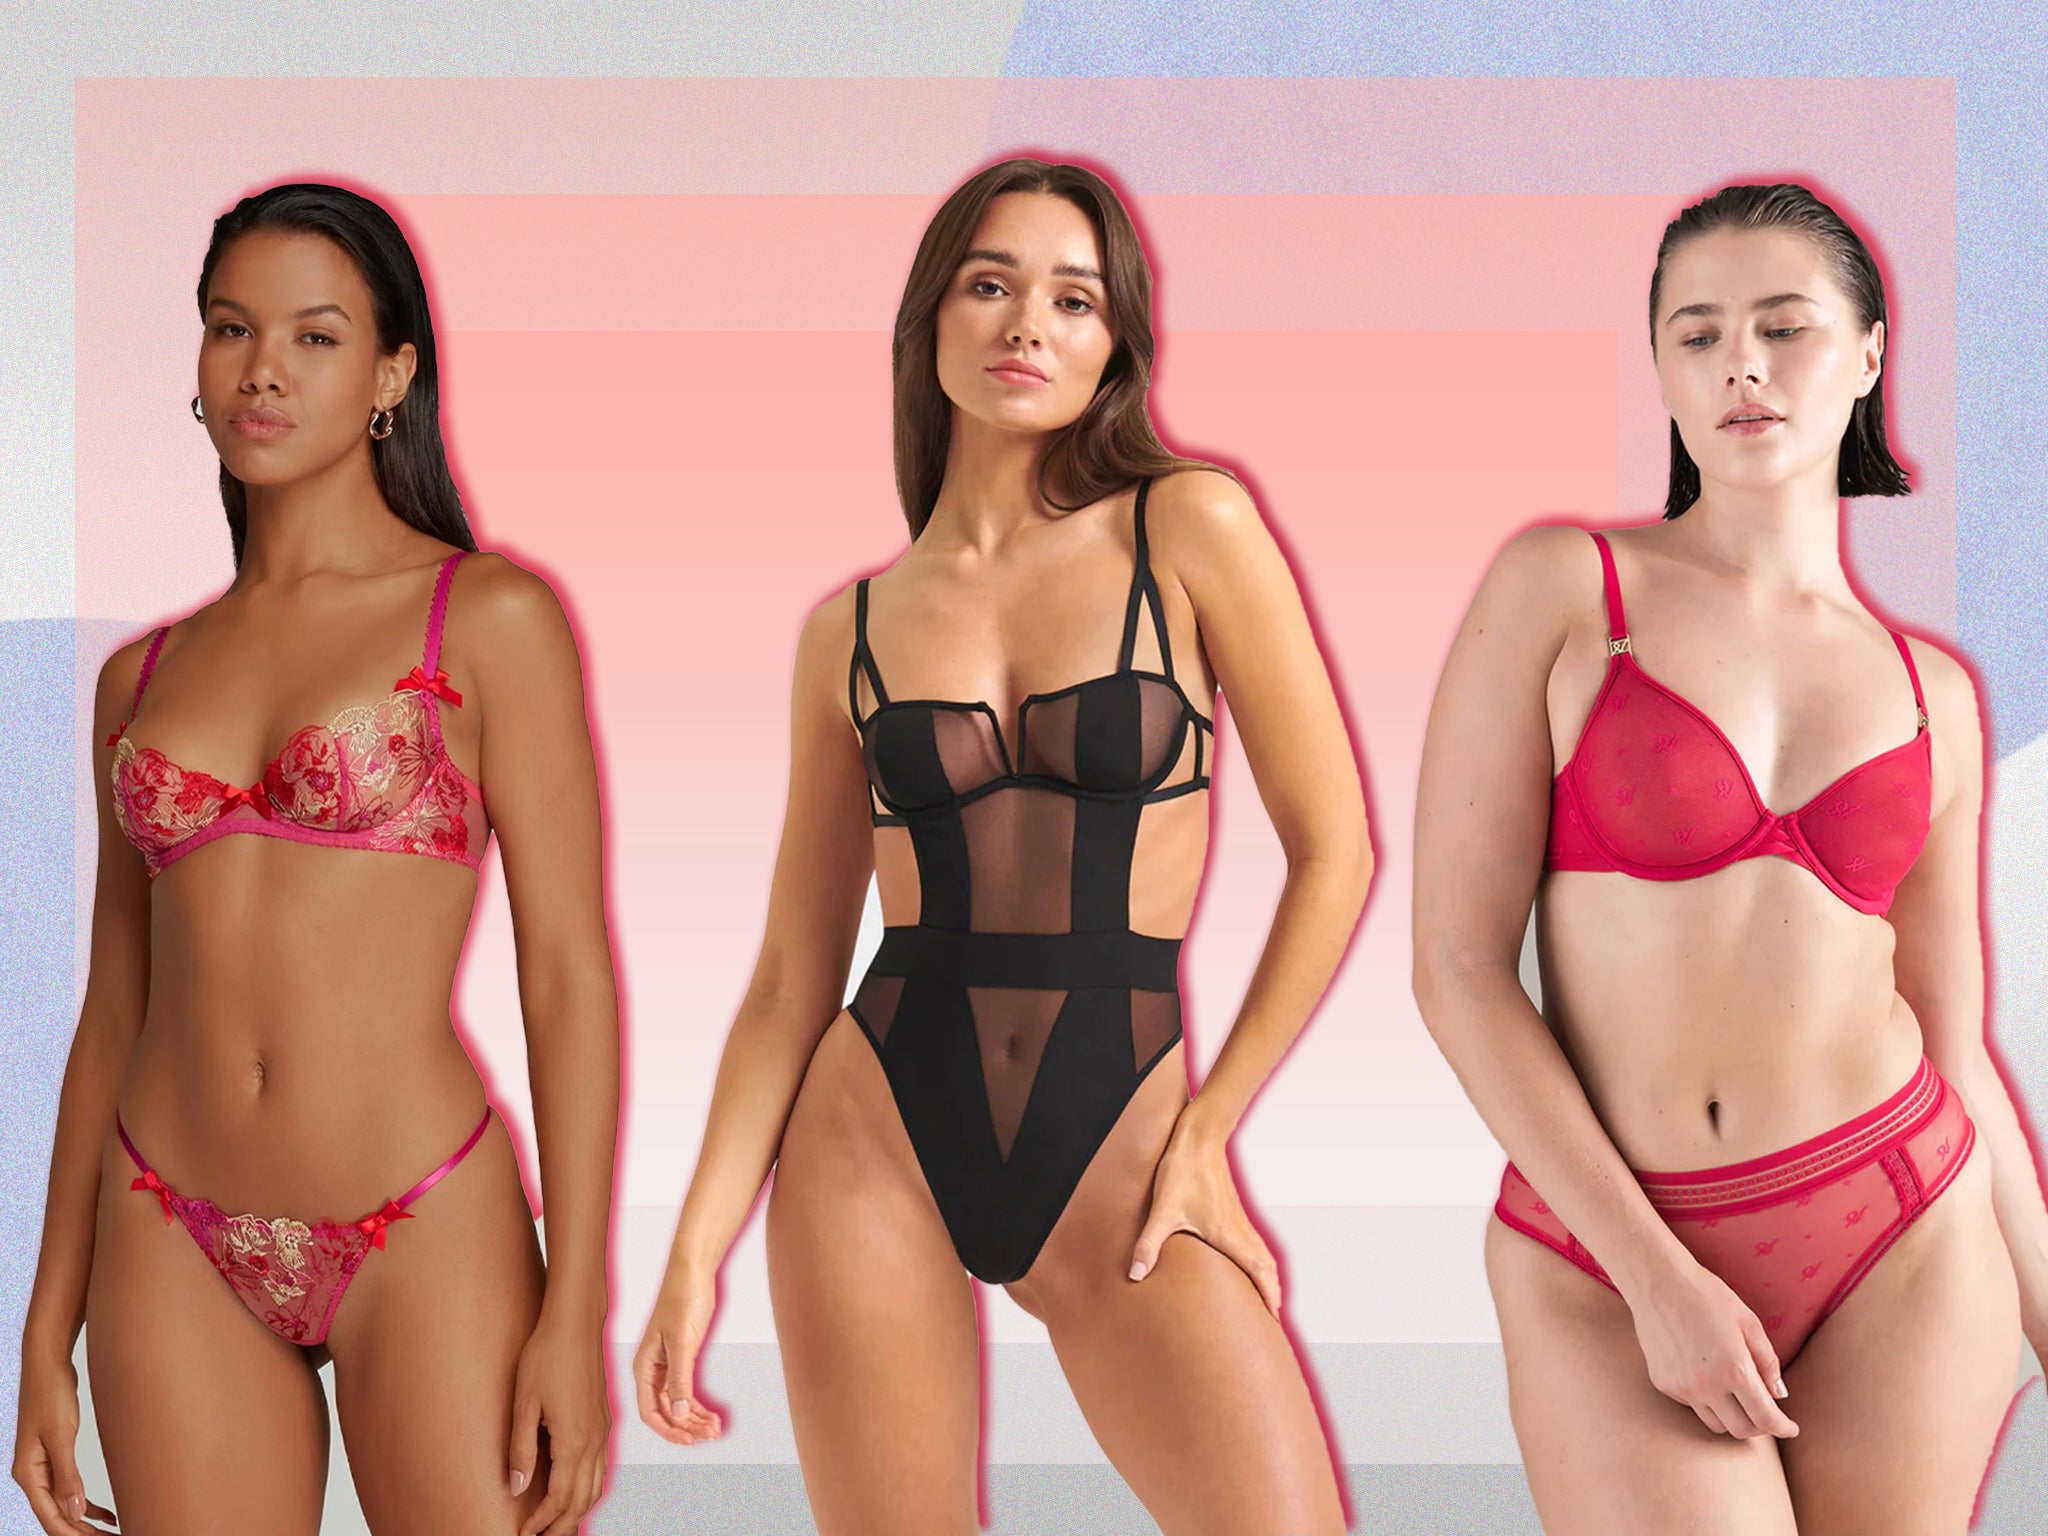 10 best lingerie sets that will make you look and feel great